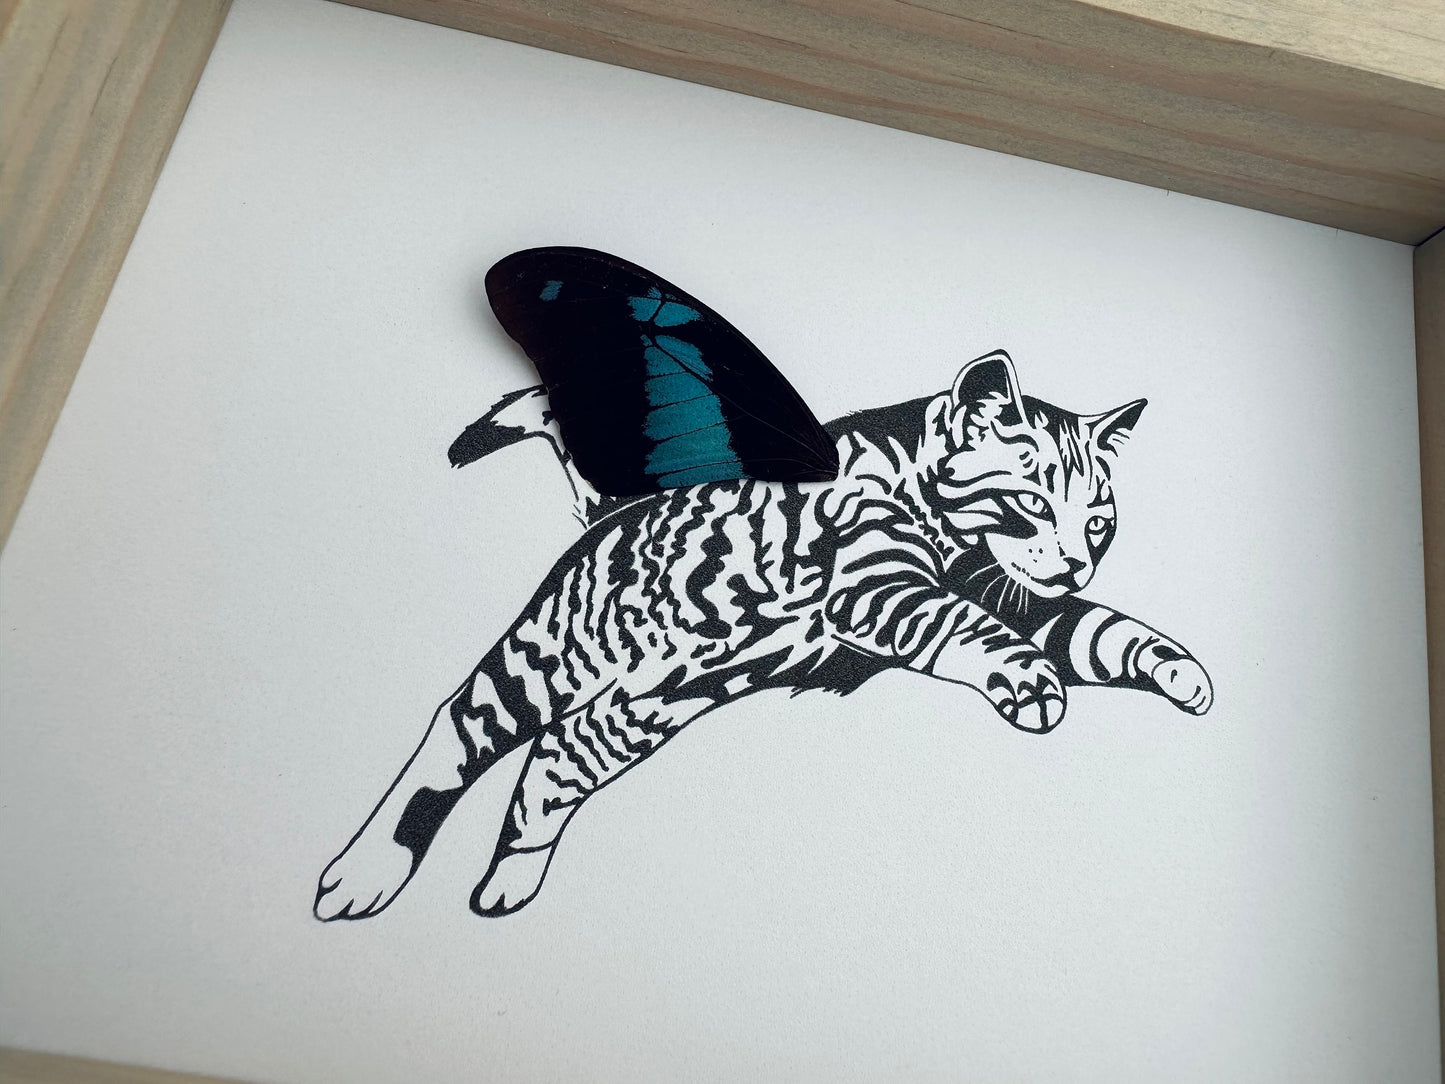 Tabby Striped Cat Real Butterfly Wing Art Ethically Sourced Made in MN USA - Holly Ulm - Isms Butterfly Conservation Art